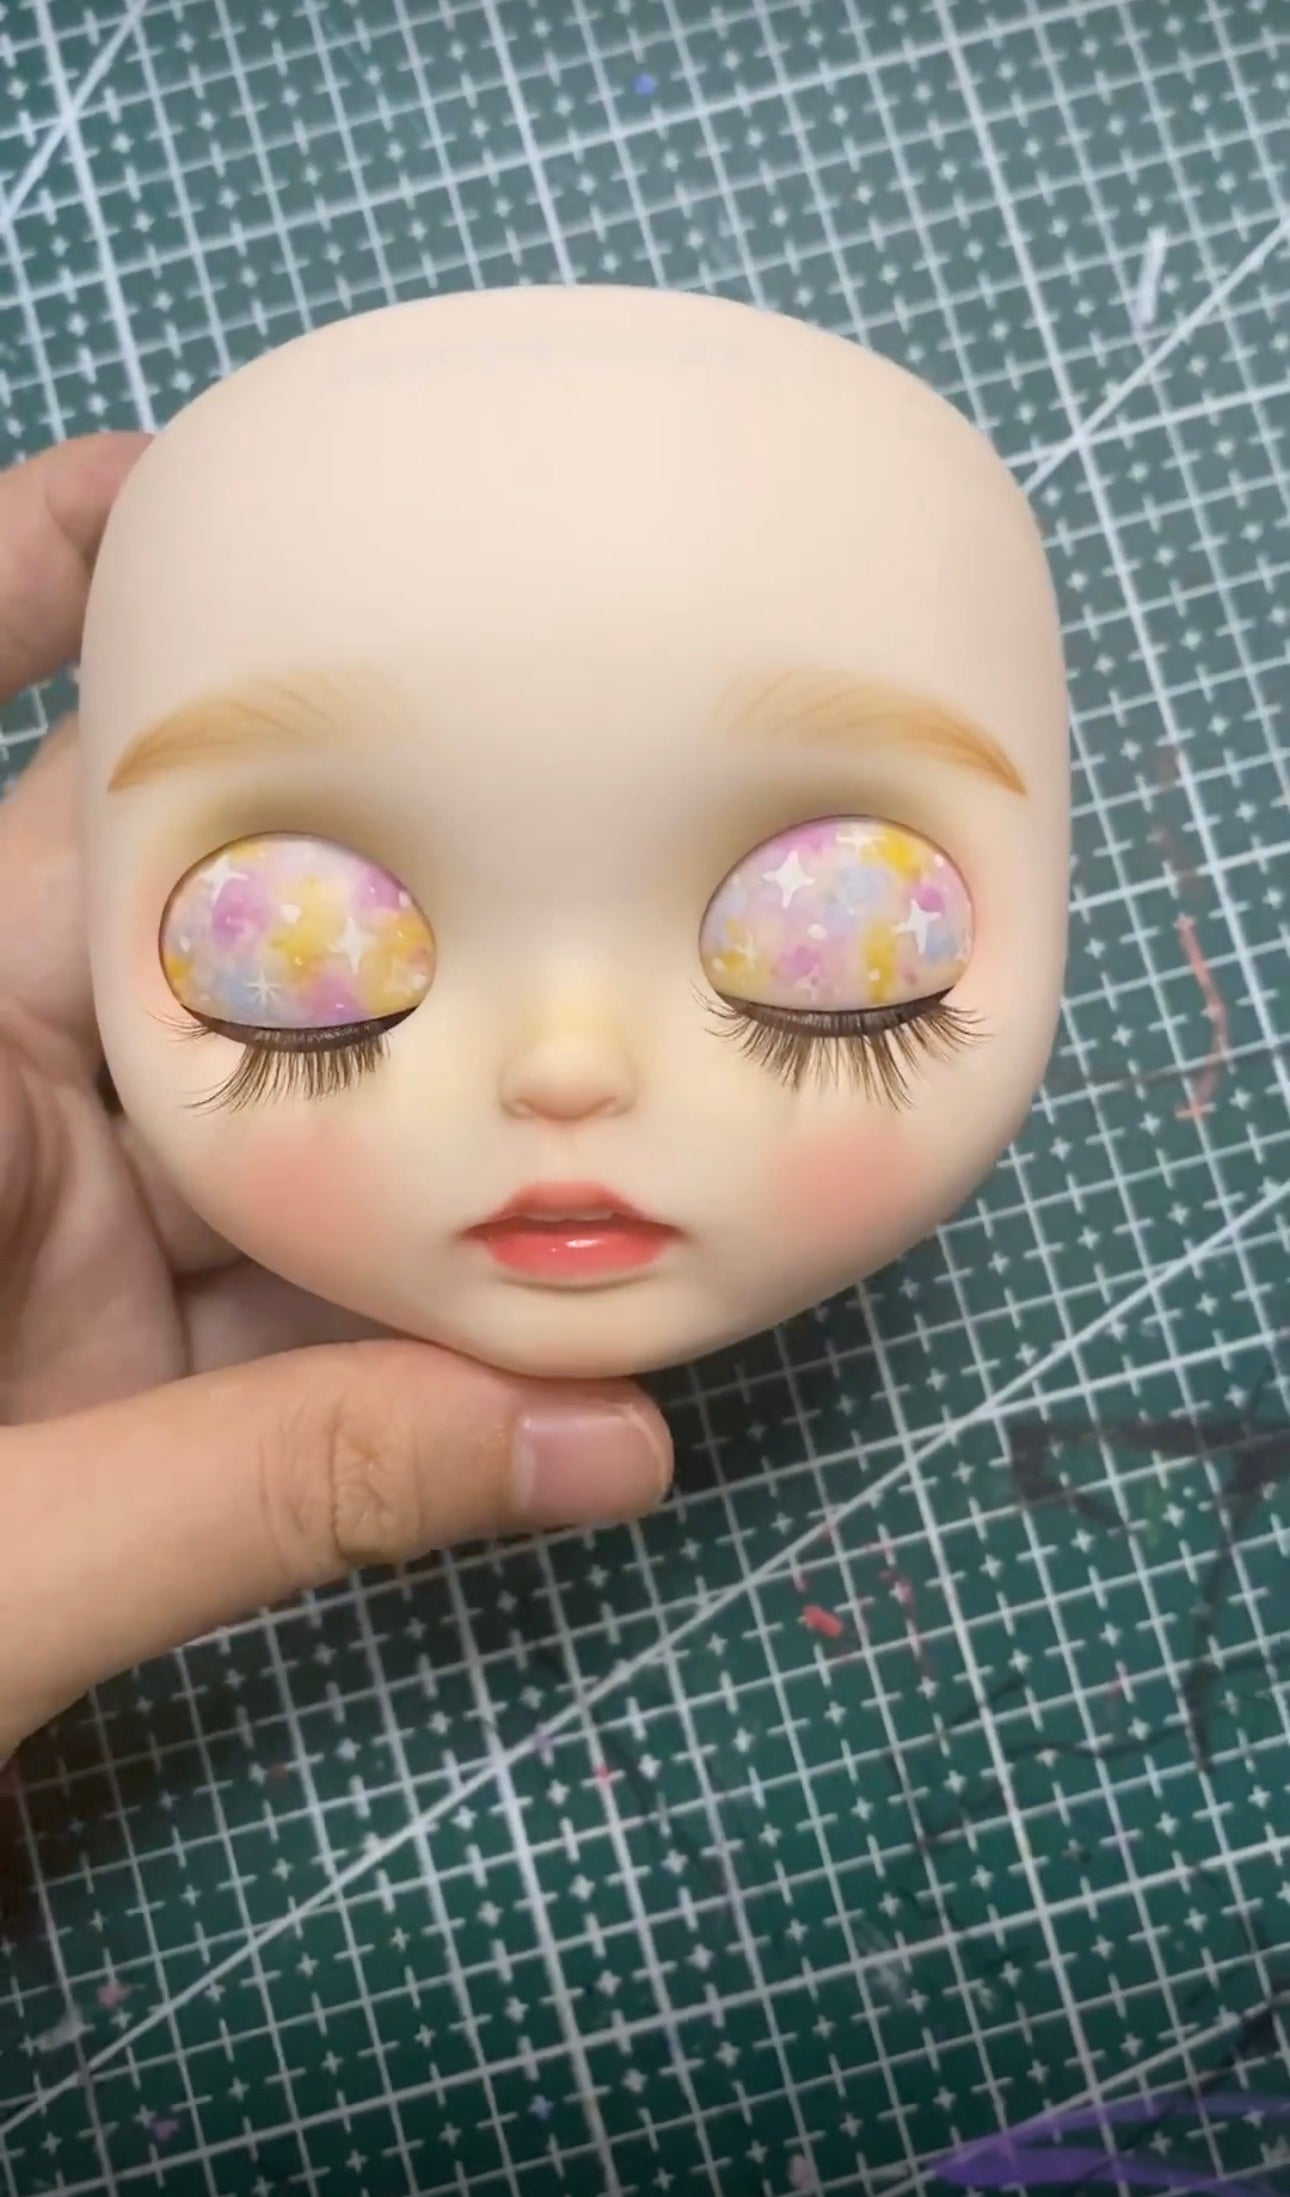 Halloween Blythe Doll Custom Faceplate with Makeup(White Skin) -RBL 05